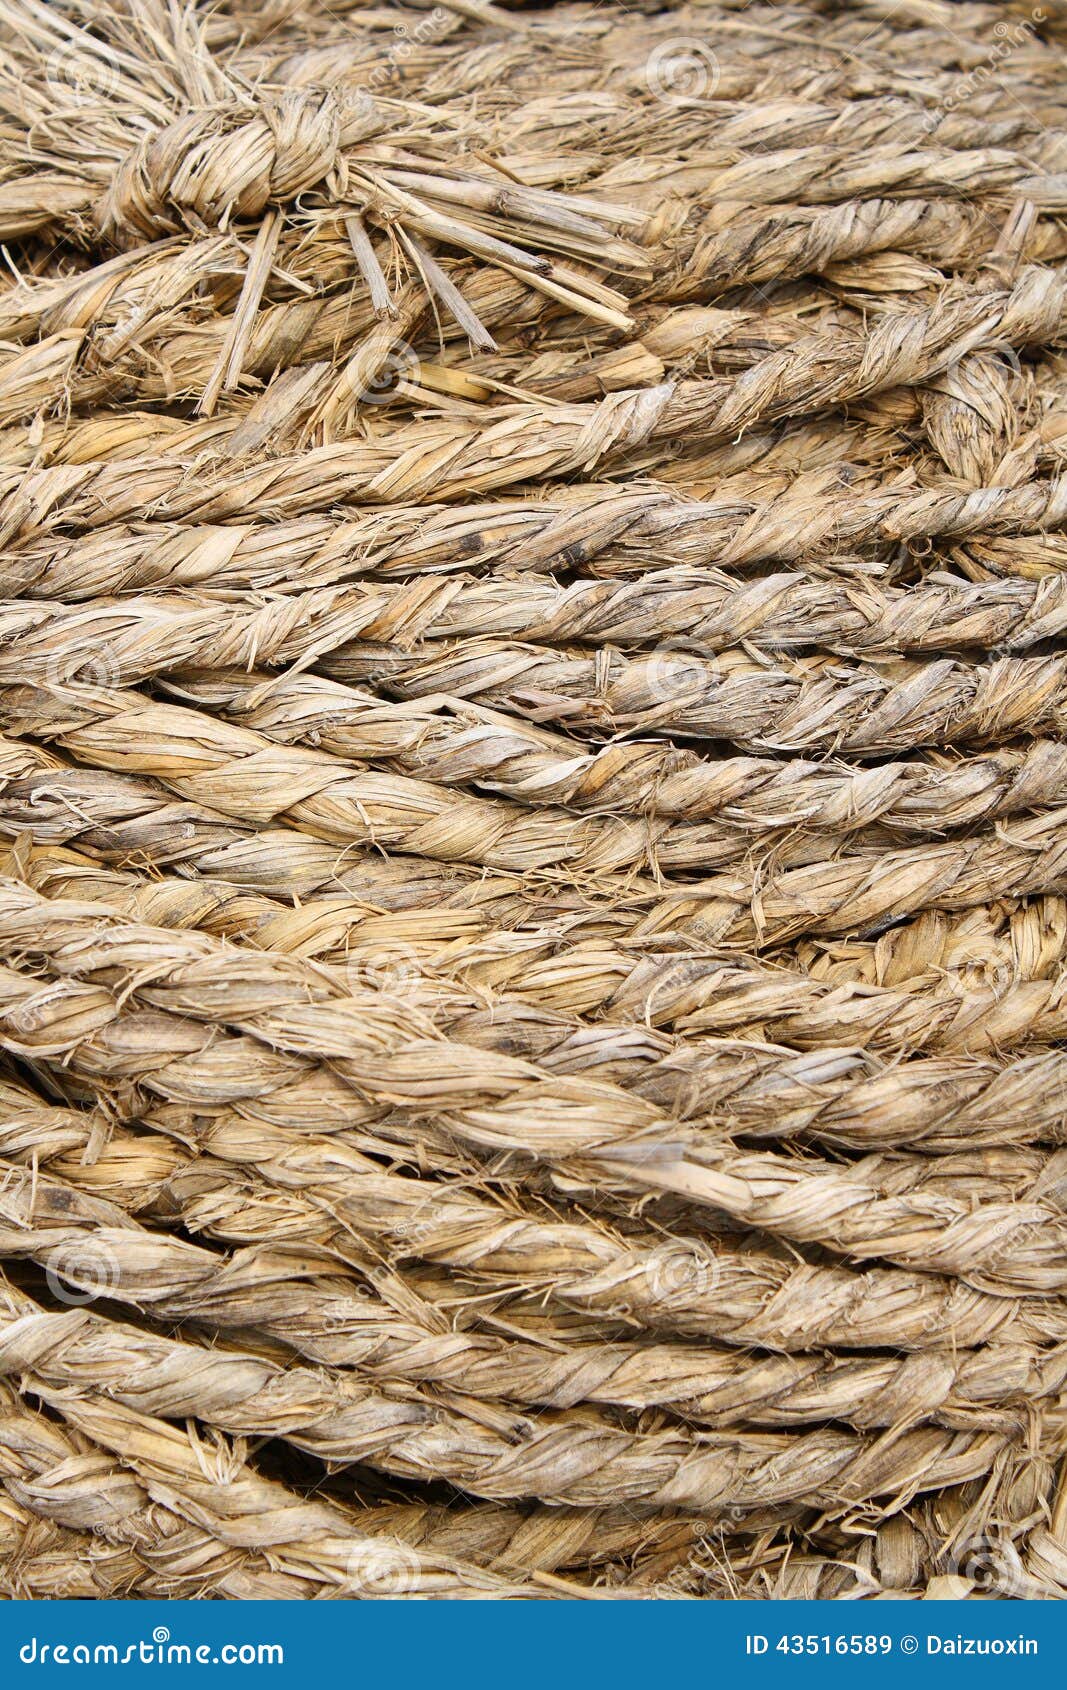 Grass rope stock image. Image of woven, neat, twisted - 43516589